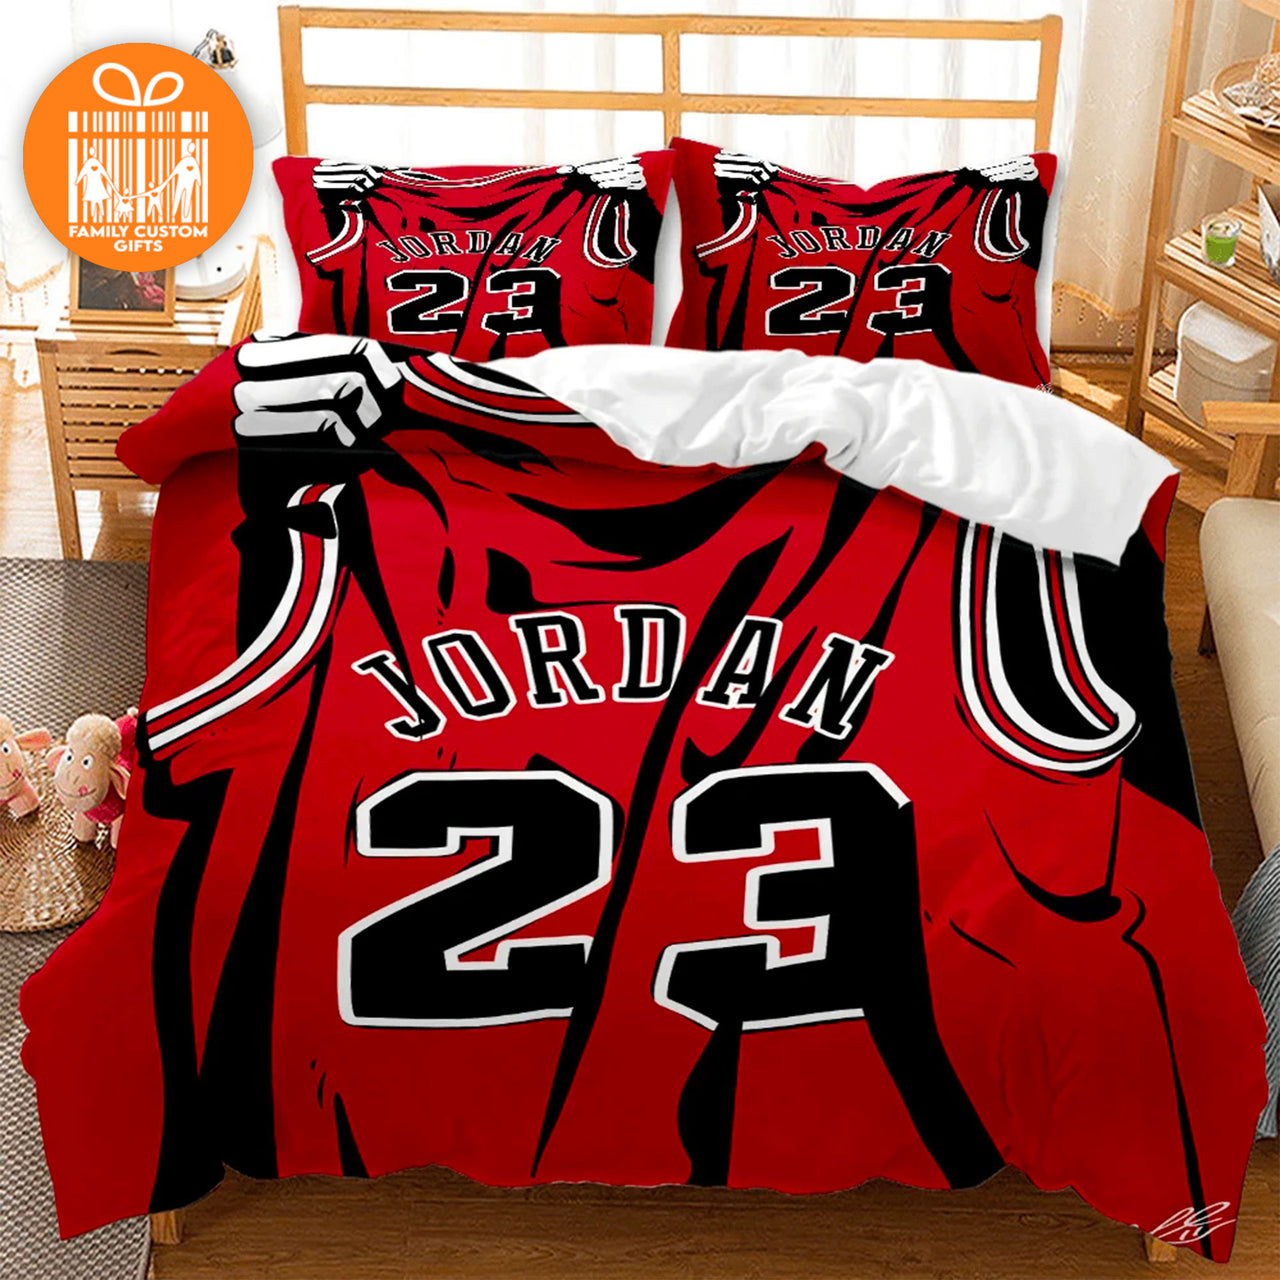 Custom Quilt Sets for Kids Teens Adult Basketball Personalized Quilt Bedding